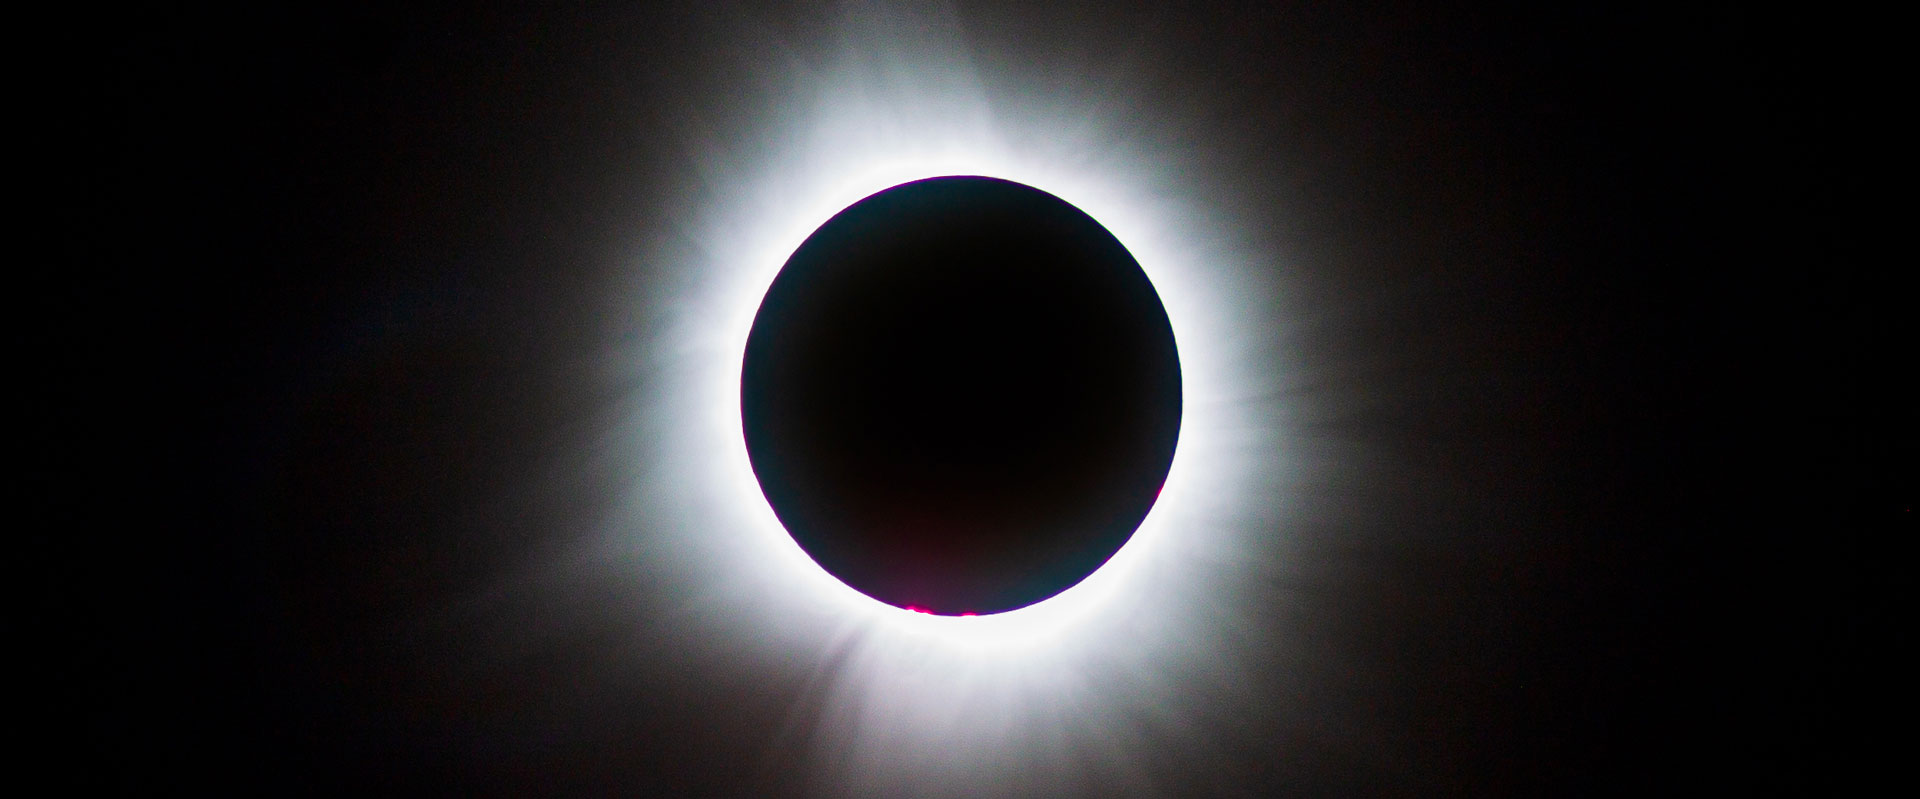 A photo of totality. The Sun's corona is visible.